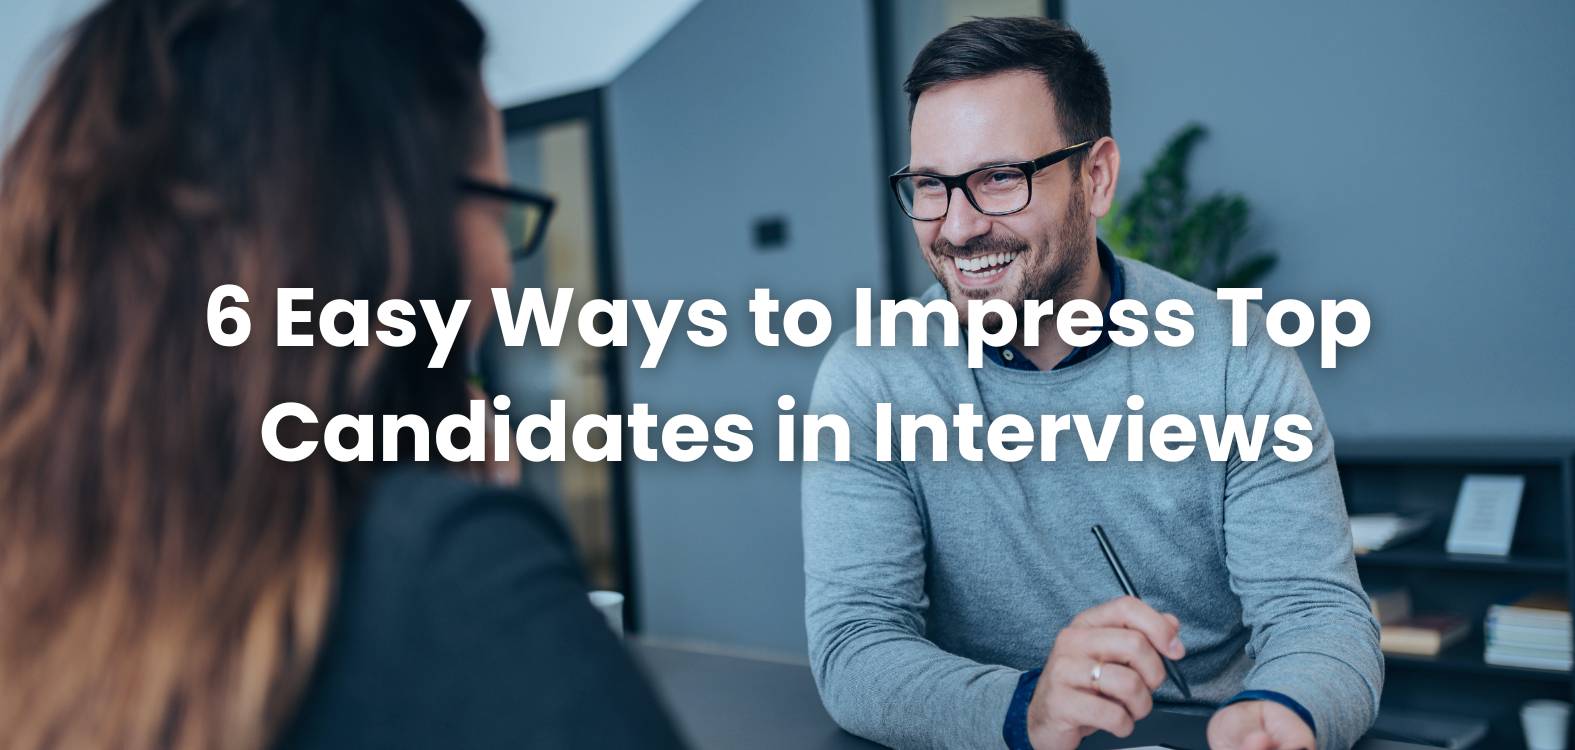 6 Easy Ways to Impress Top Candidates in Interviews